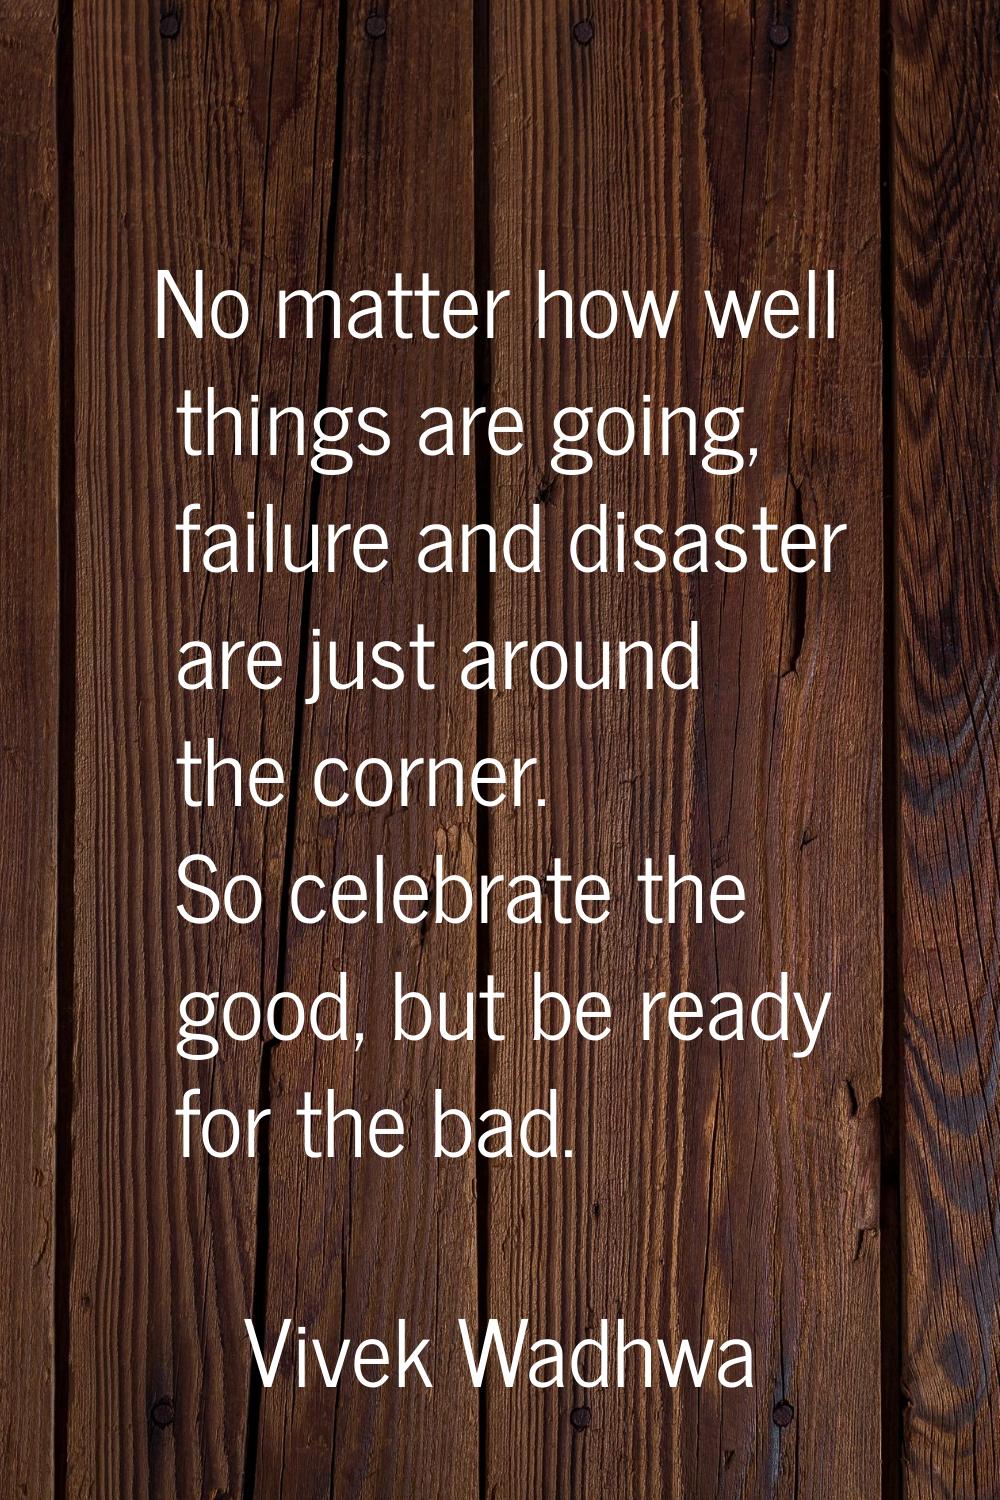 No matter how well things are going, failure and disaster are just around the corner. So celebrate 